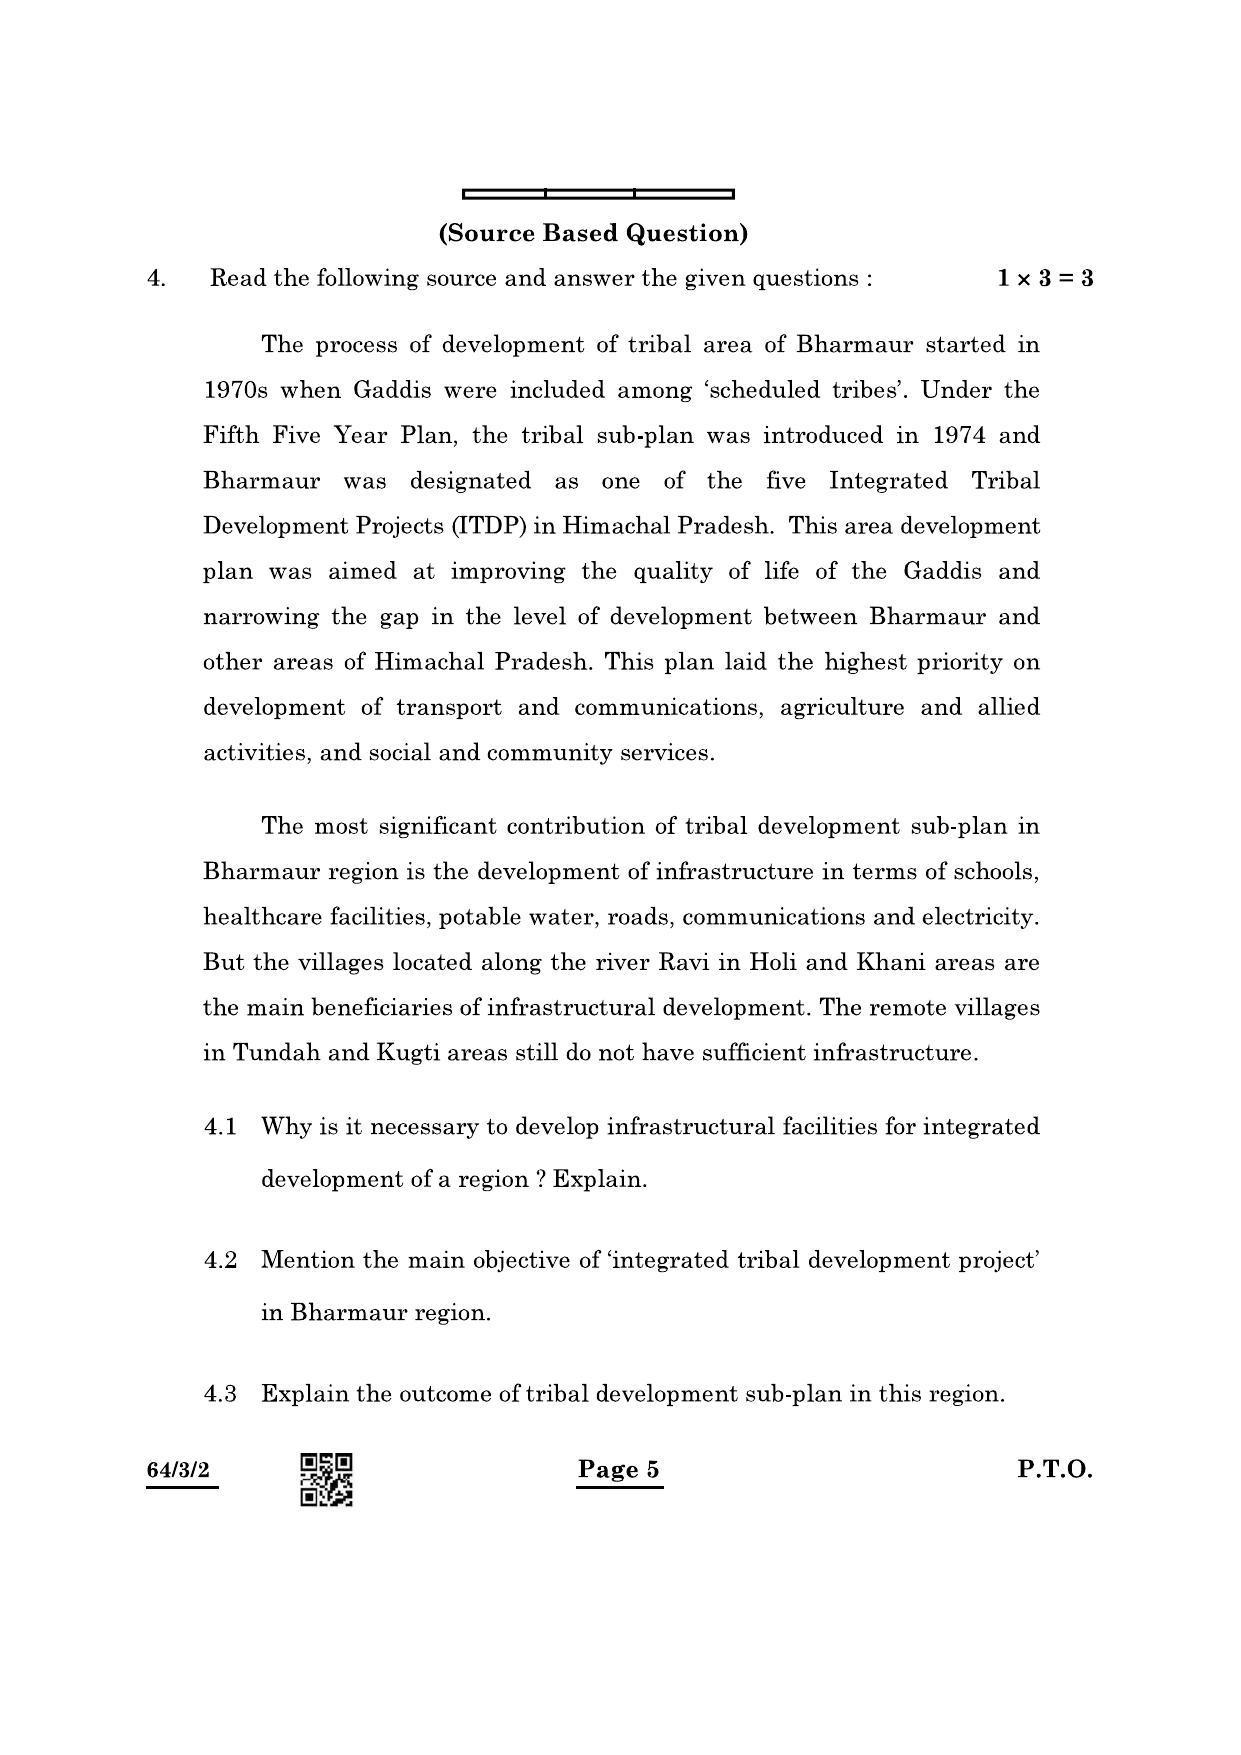 CBSE Class 12 64-3-2 Geography 2022 Question Paper - Page 5